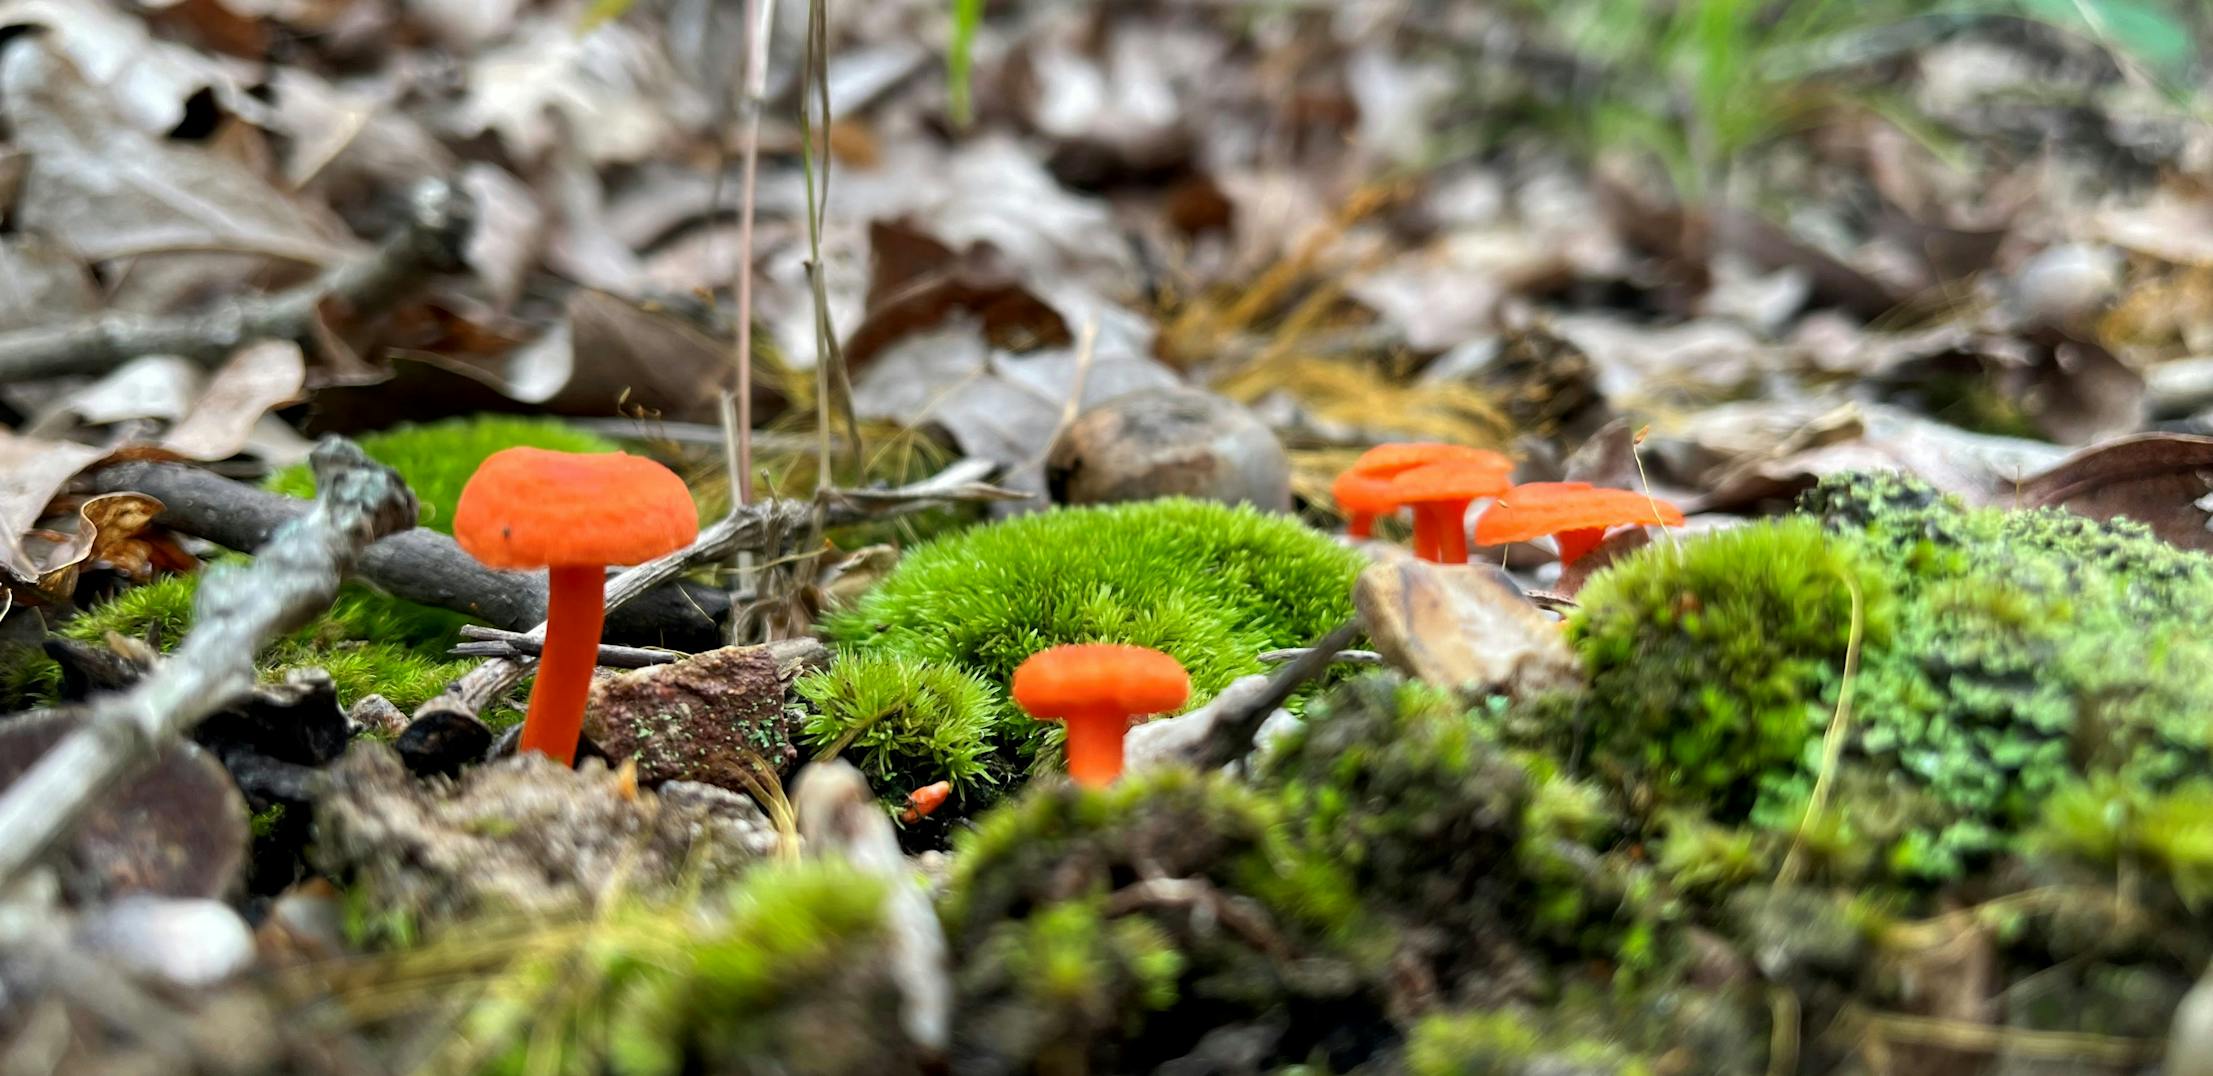 Orange-red mushrooms pictured next to moss on the forest floor of Mark Twain National Forest.